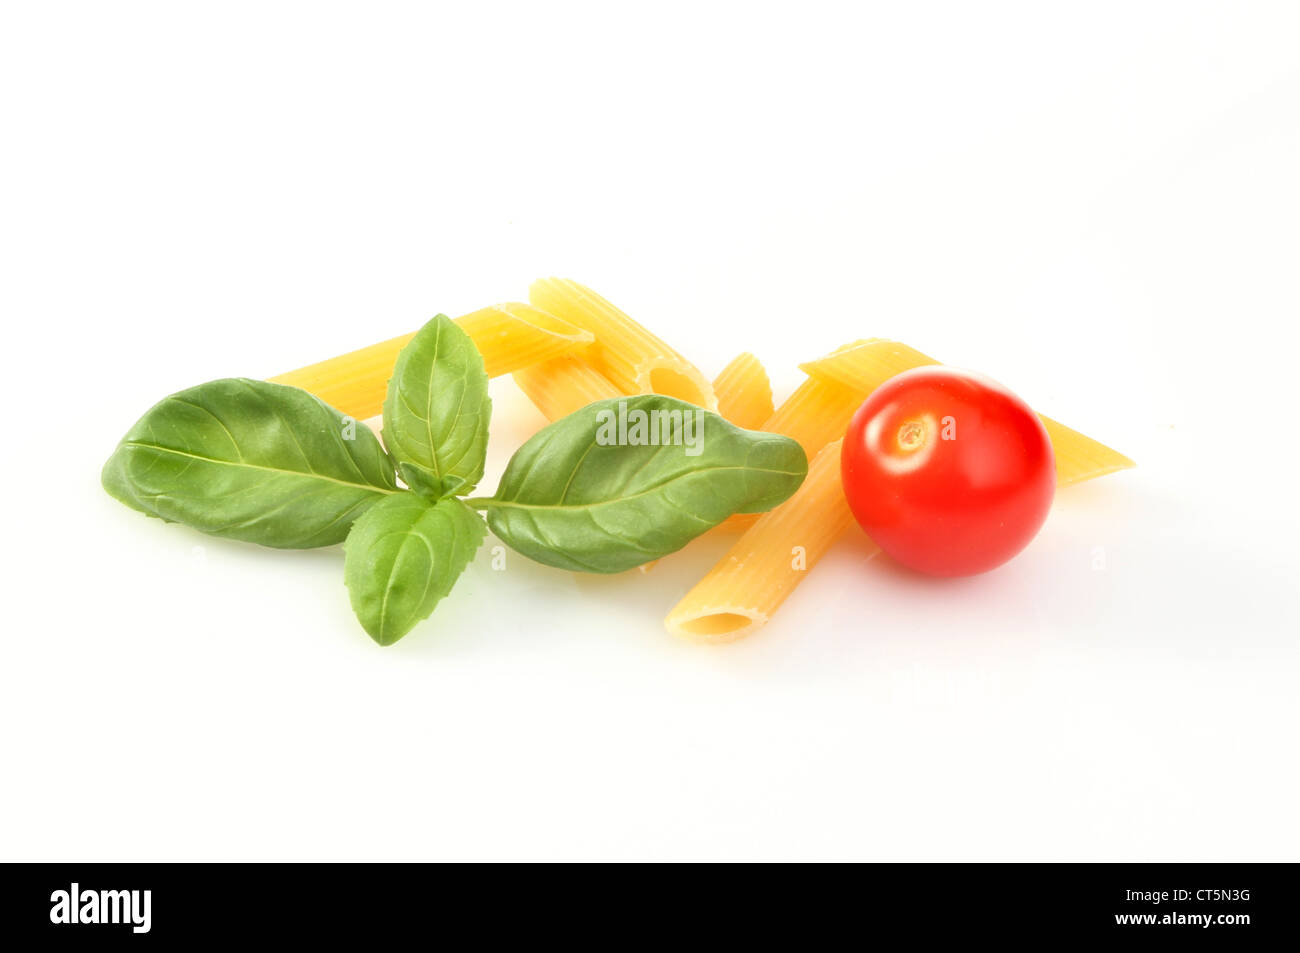 Basil penne pasta and a tomato on a white background Stock Photo